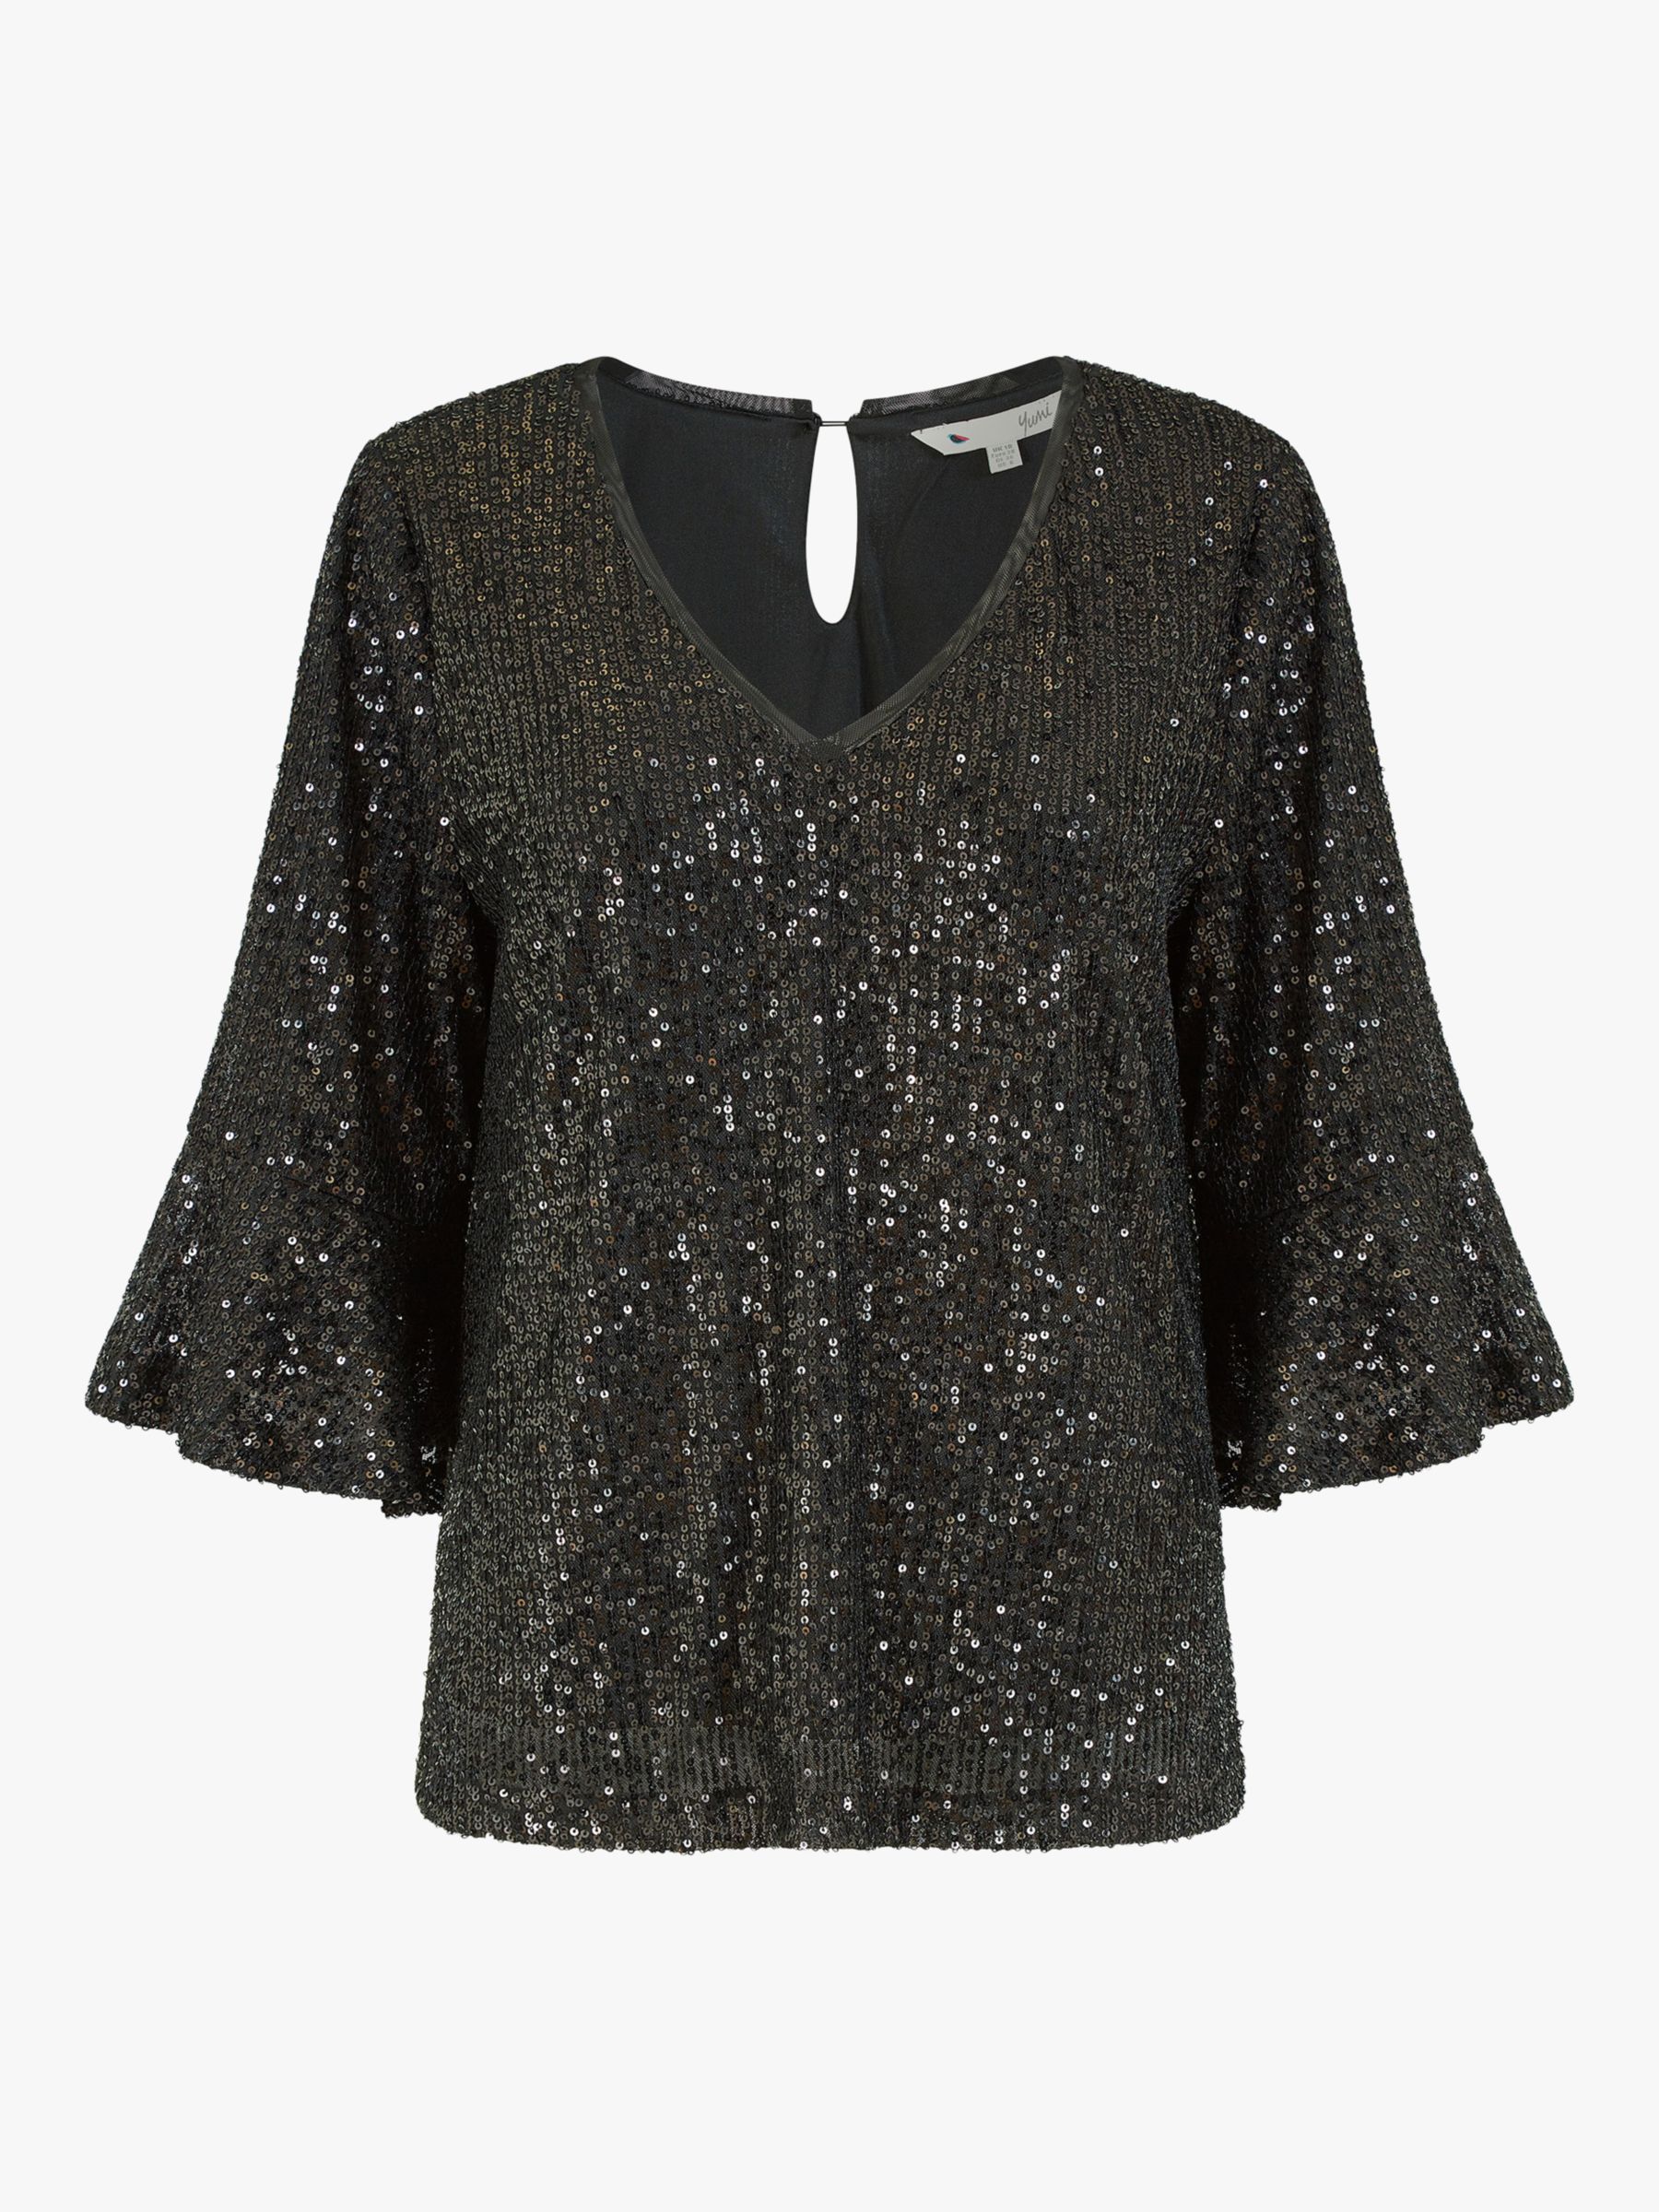 Yumi Sequin Relaxed Fit Top, Black at John Lewis & Partners